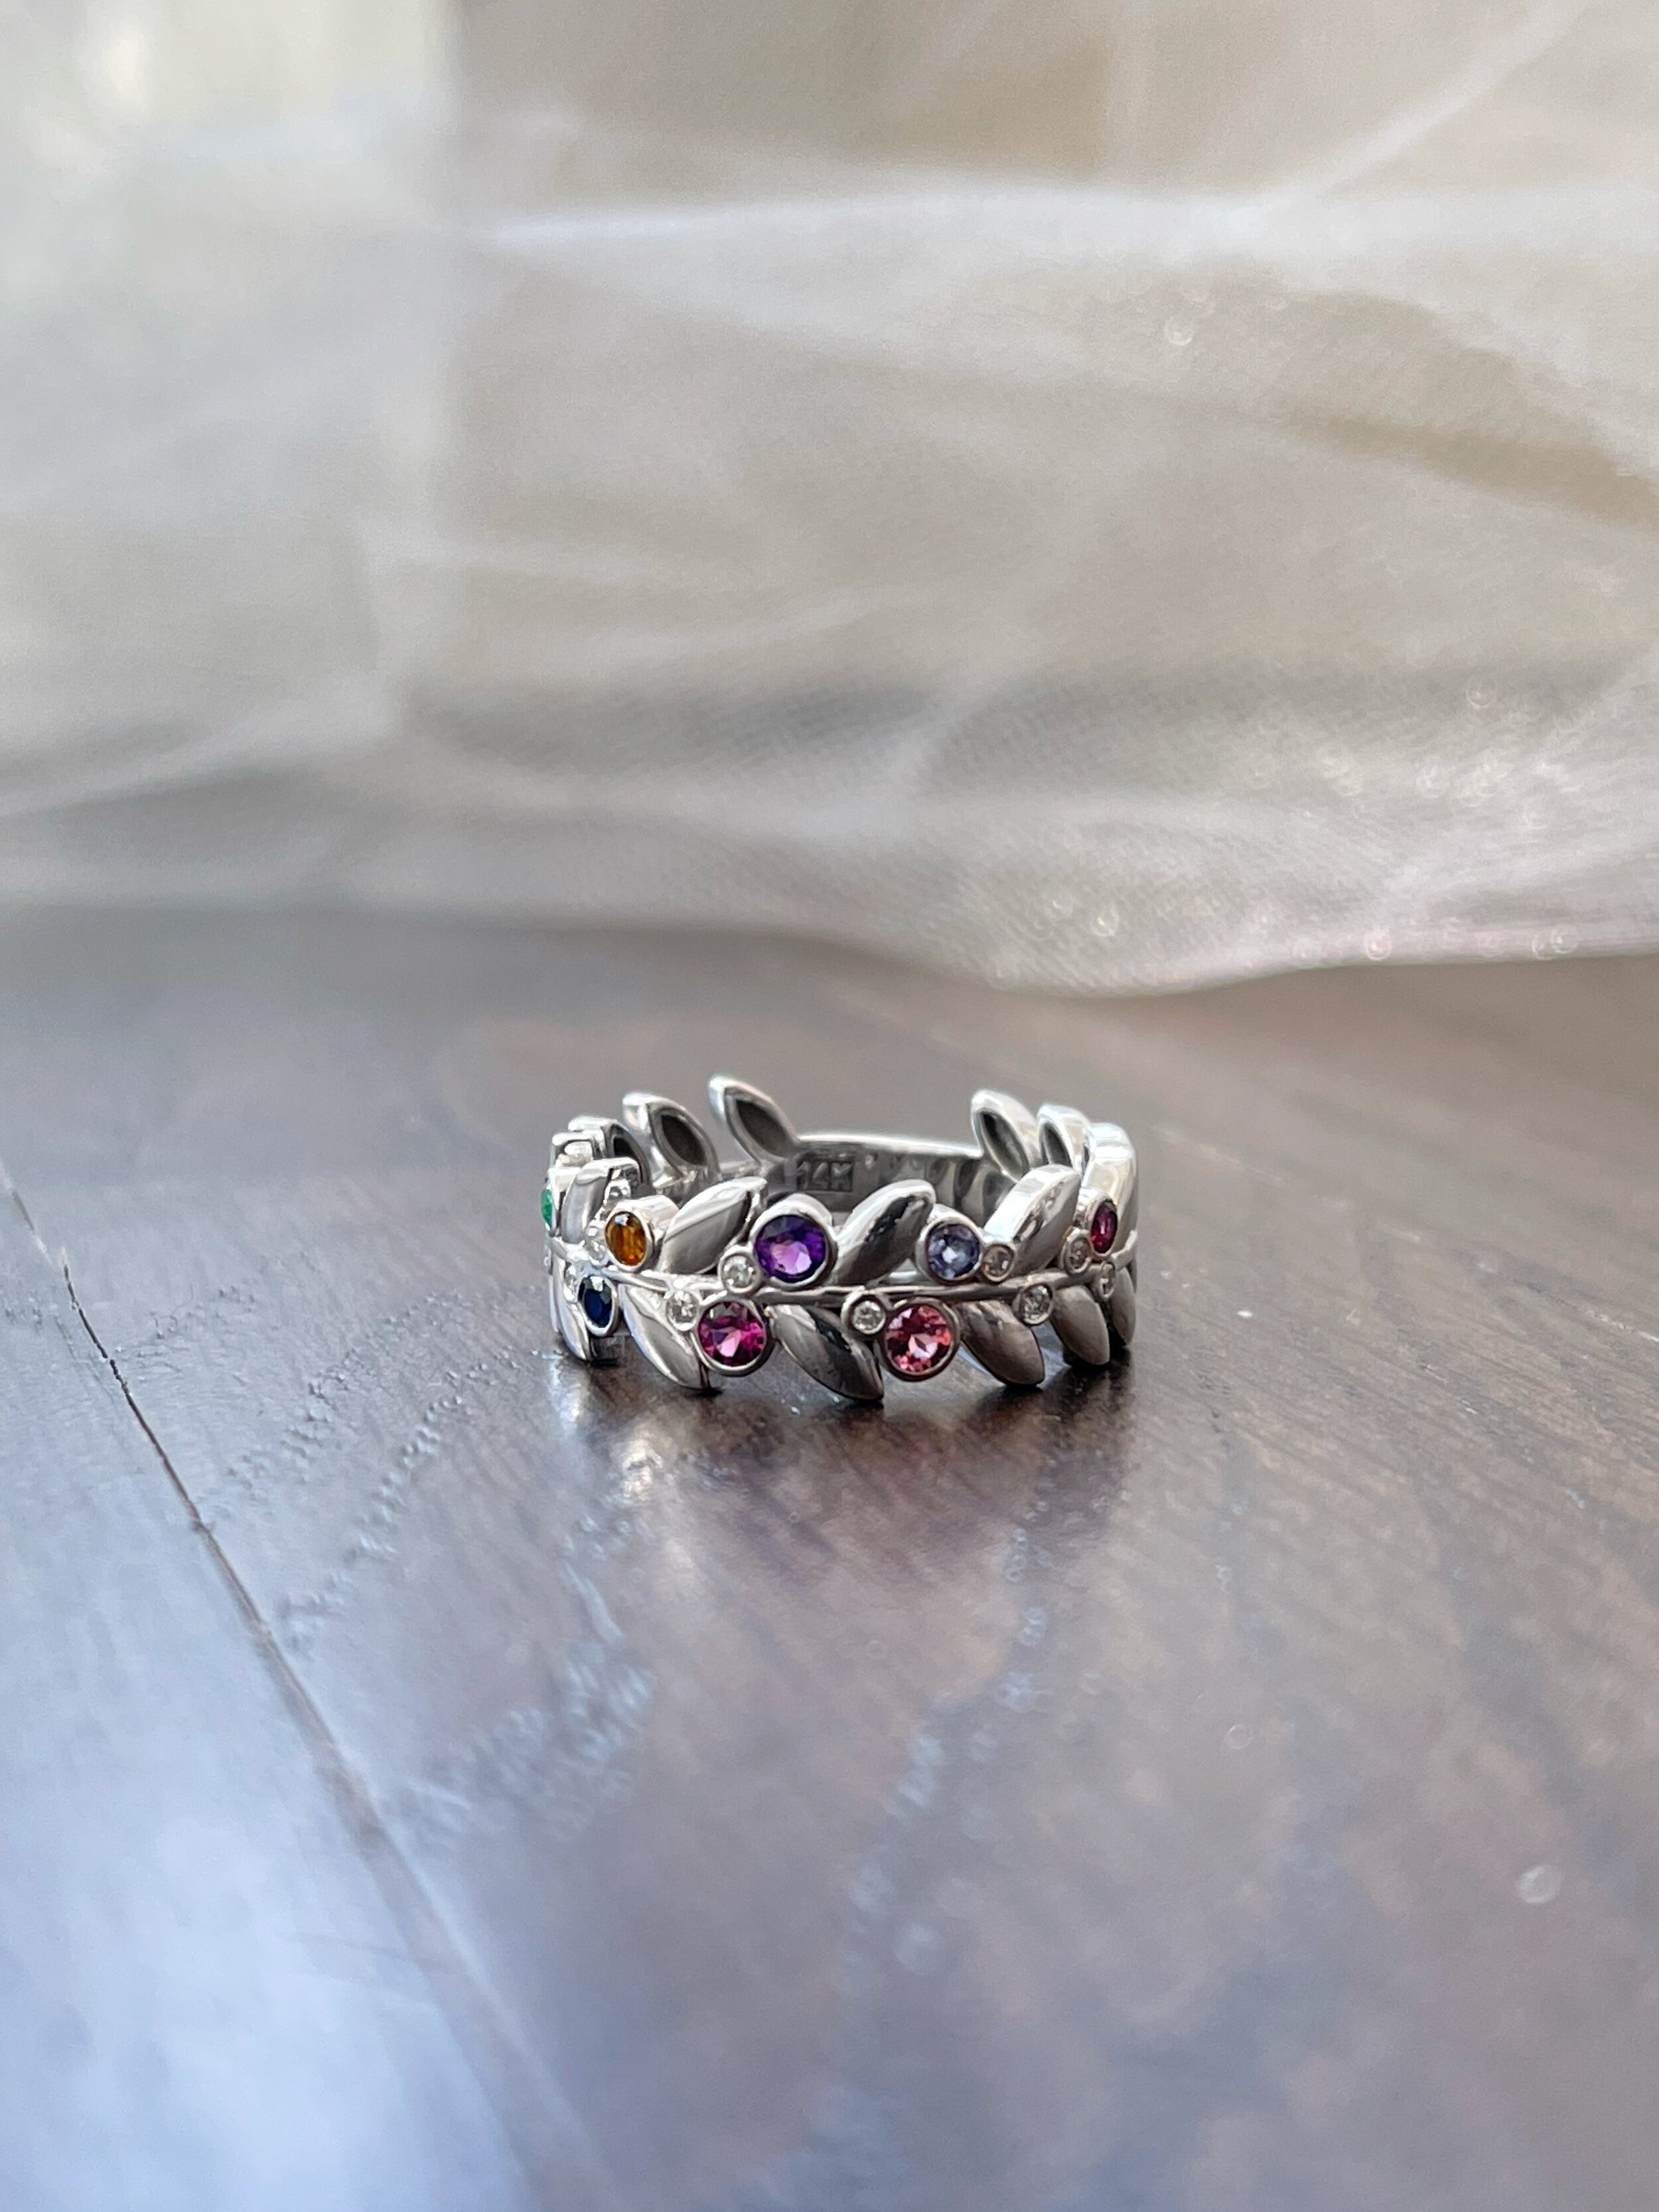 925 Silver Ring,Vintage Rings,Silver Designer Ring,Floral Ring,Bohemian Ring,Signet Ring,Engraved Ring,Worry Ring,Mother's Ring,Promise Ring